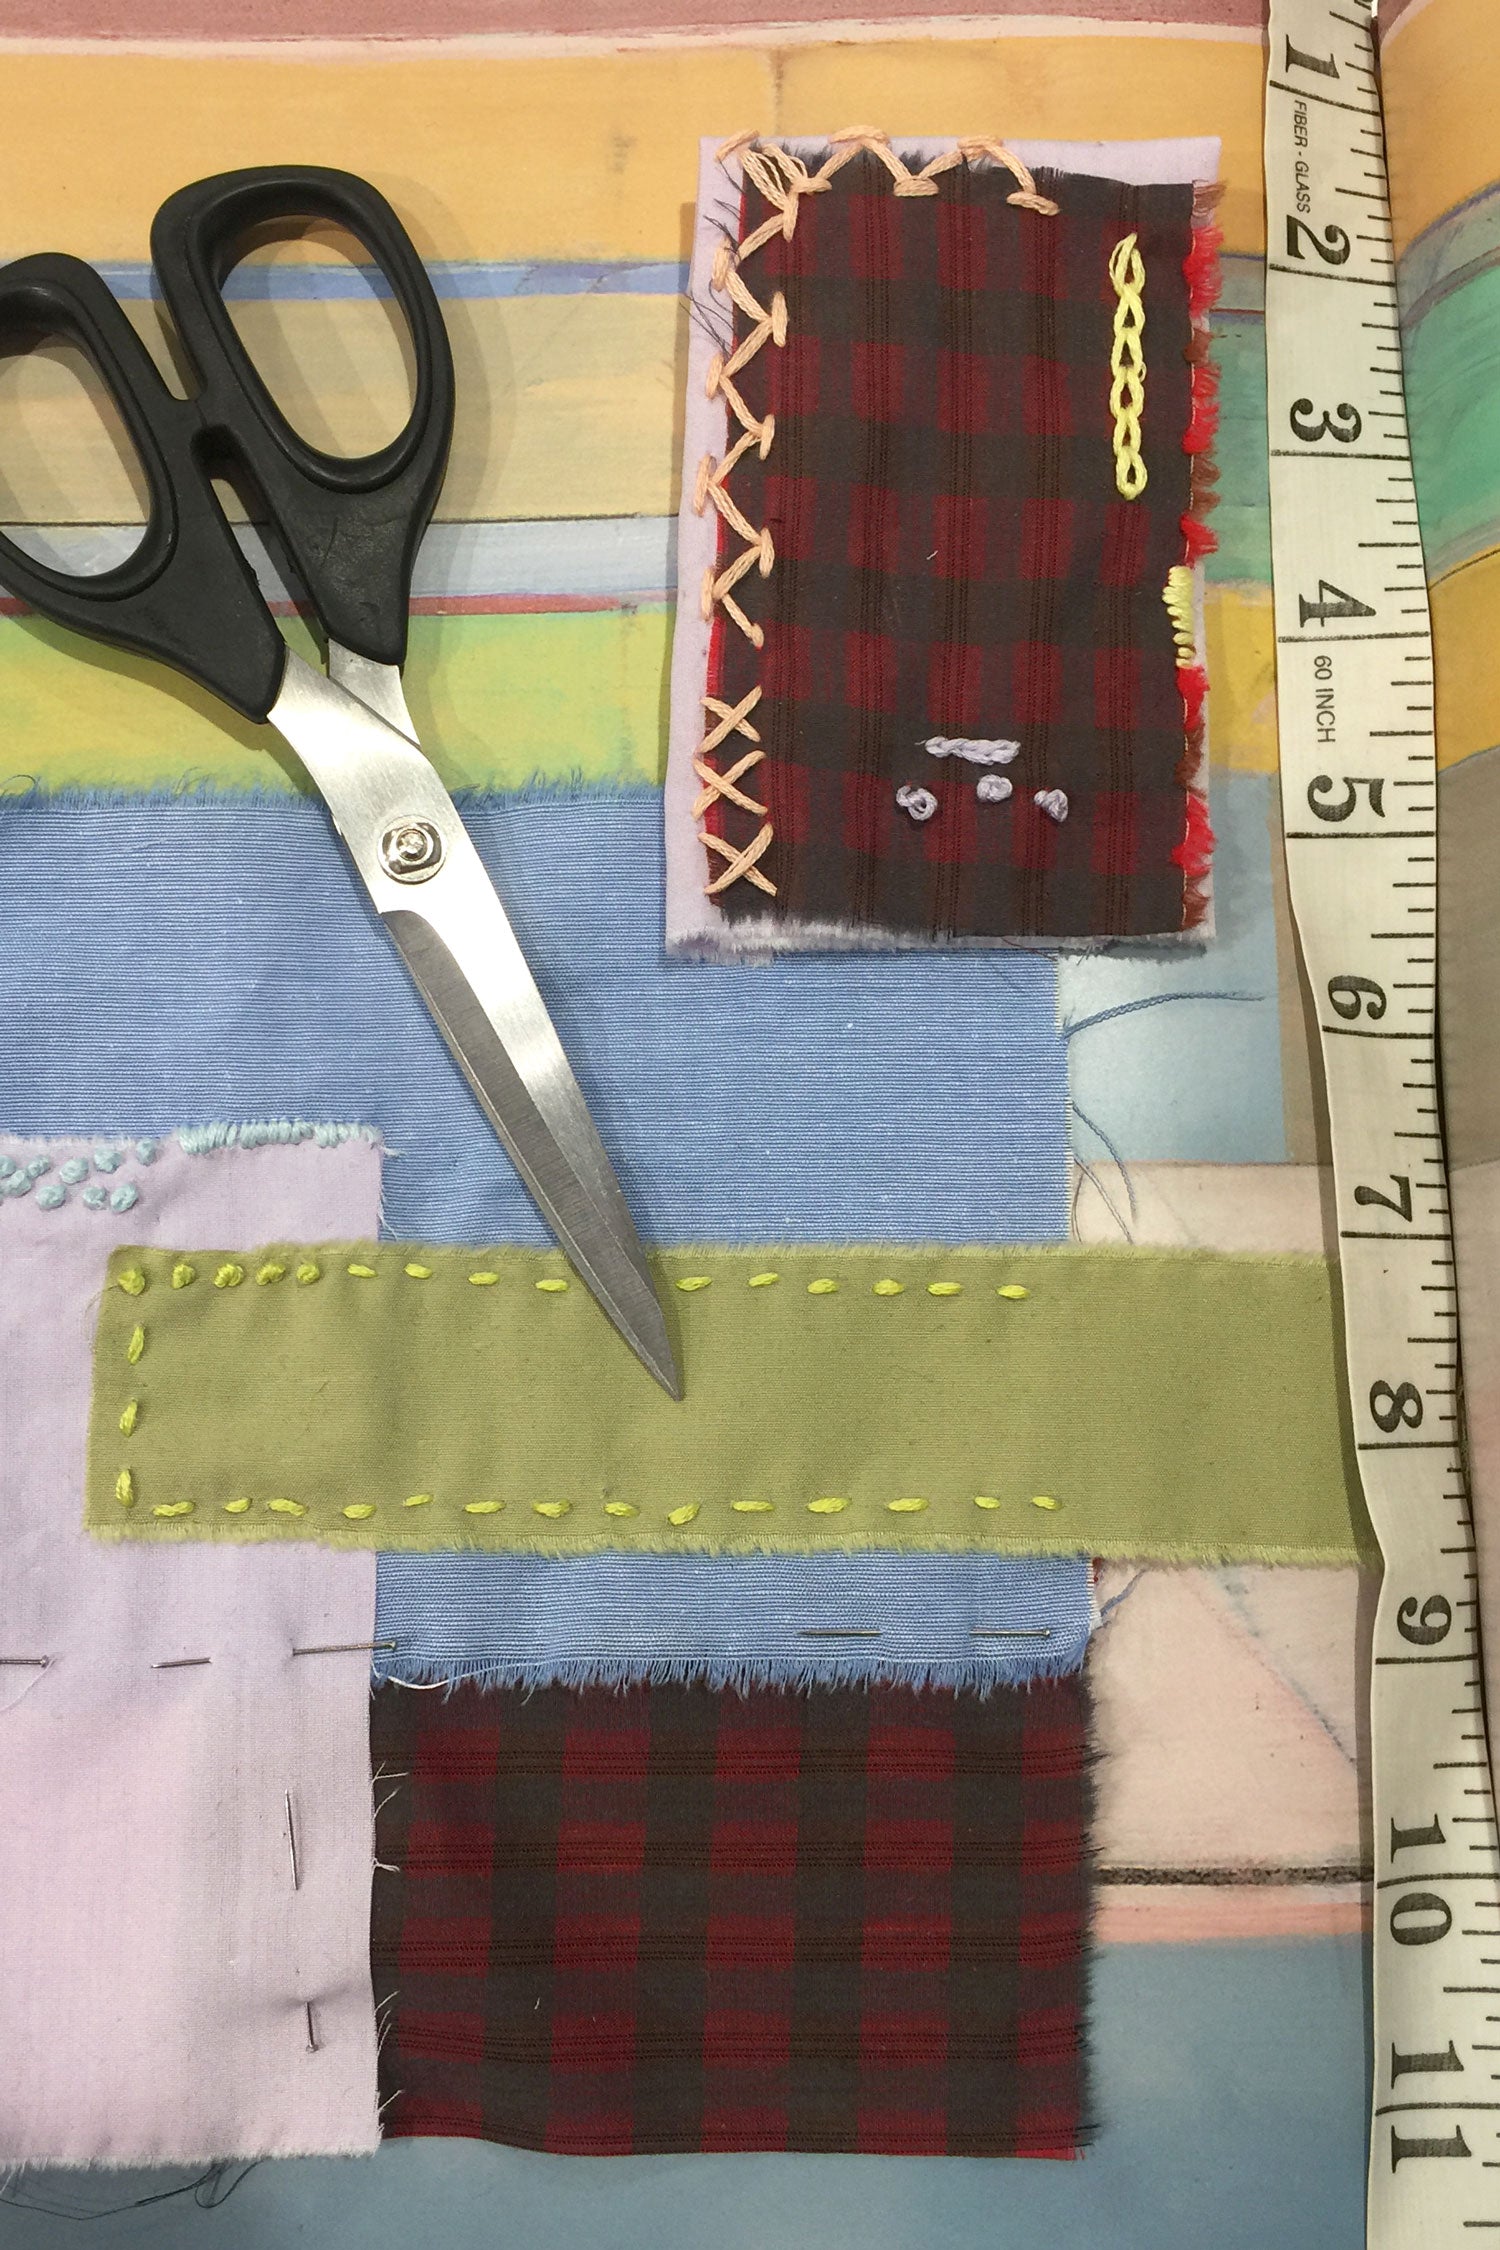 Decorative stitches and patchworking. Image shows colourful patchwork of fabrics with scissors and a tape measure in the frame.